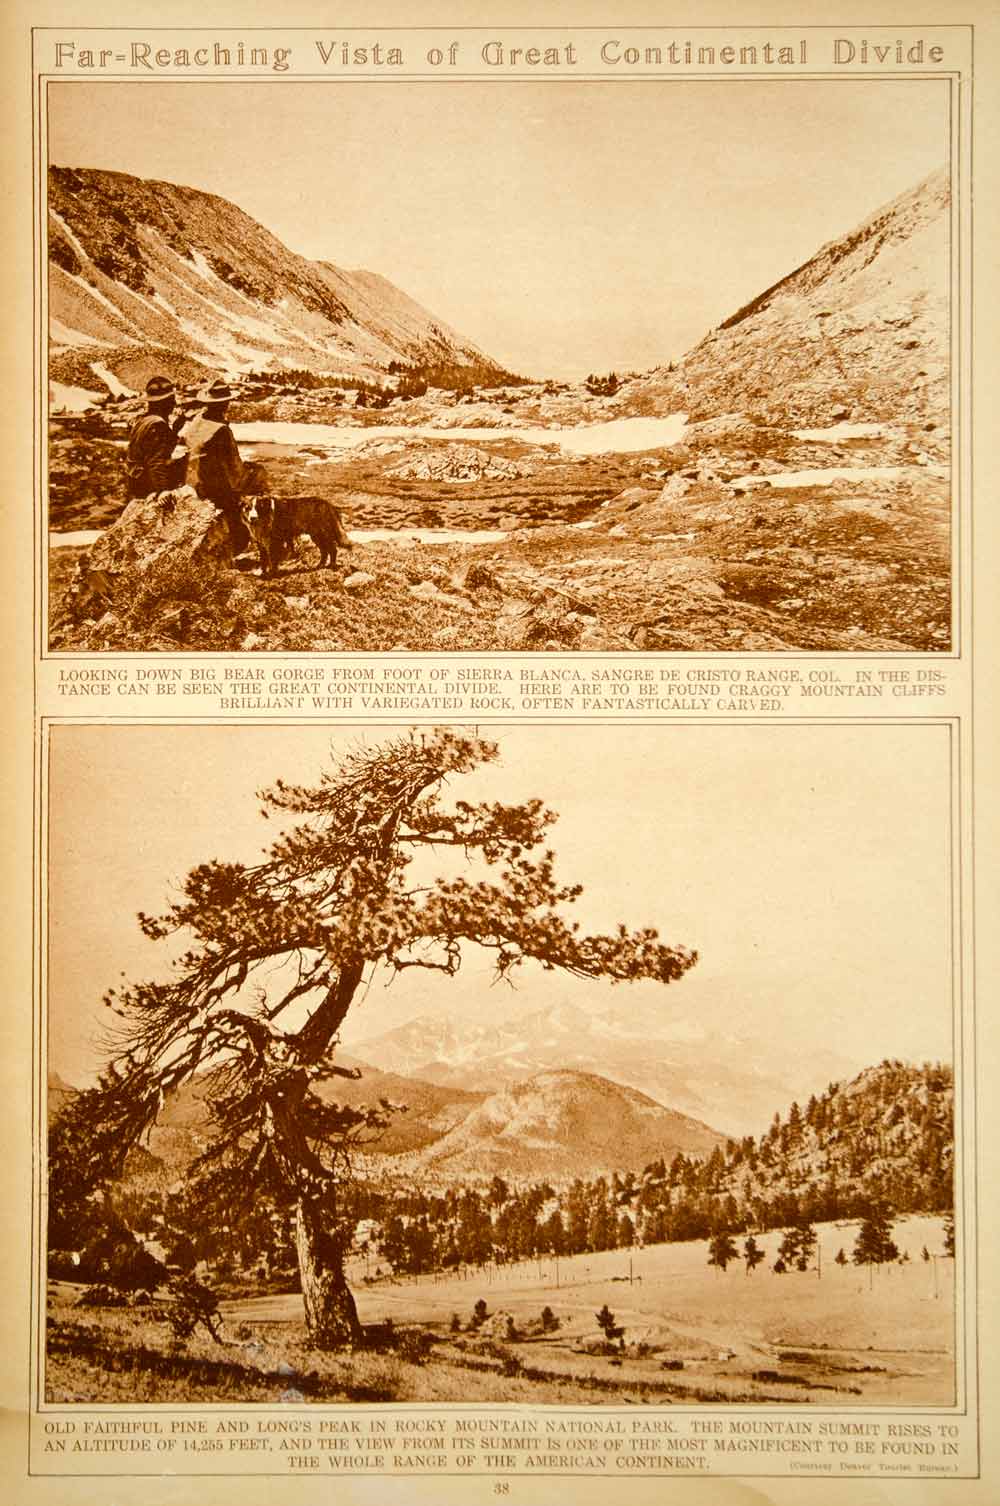 1923 Rotogravure Great Continental Divide Landscape Rocky Mountain National Park